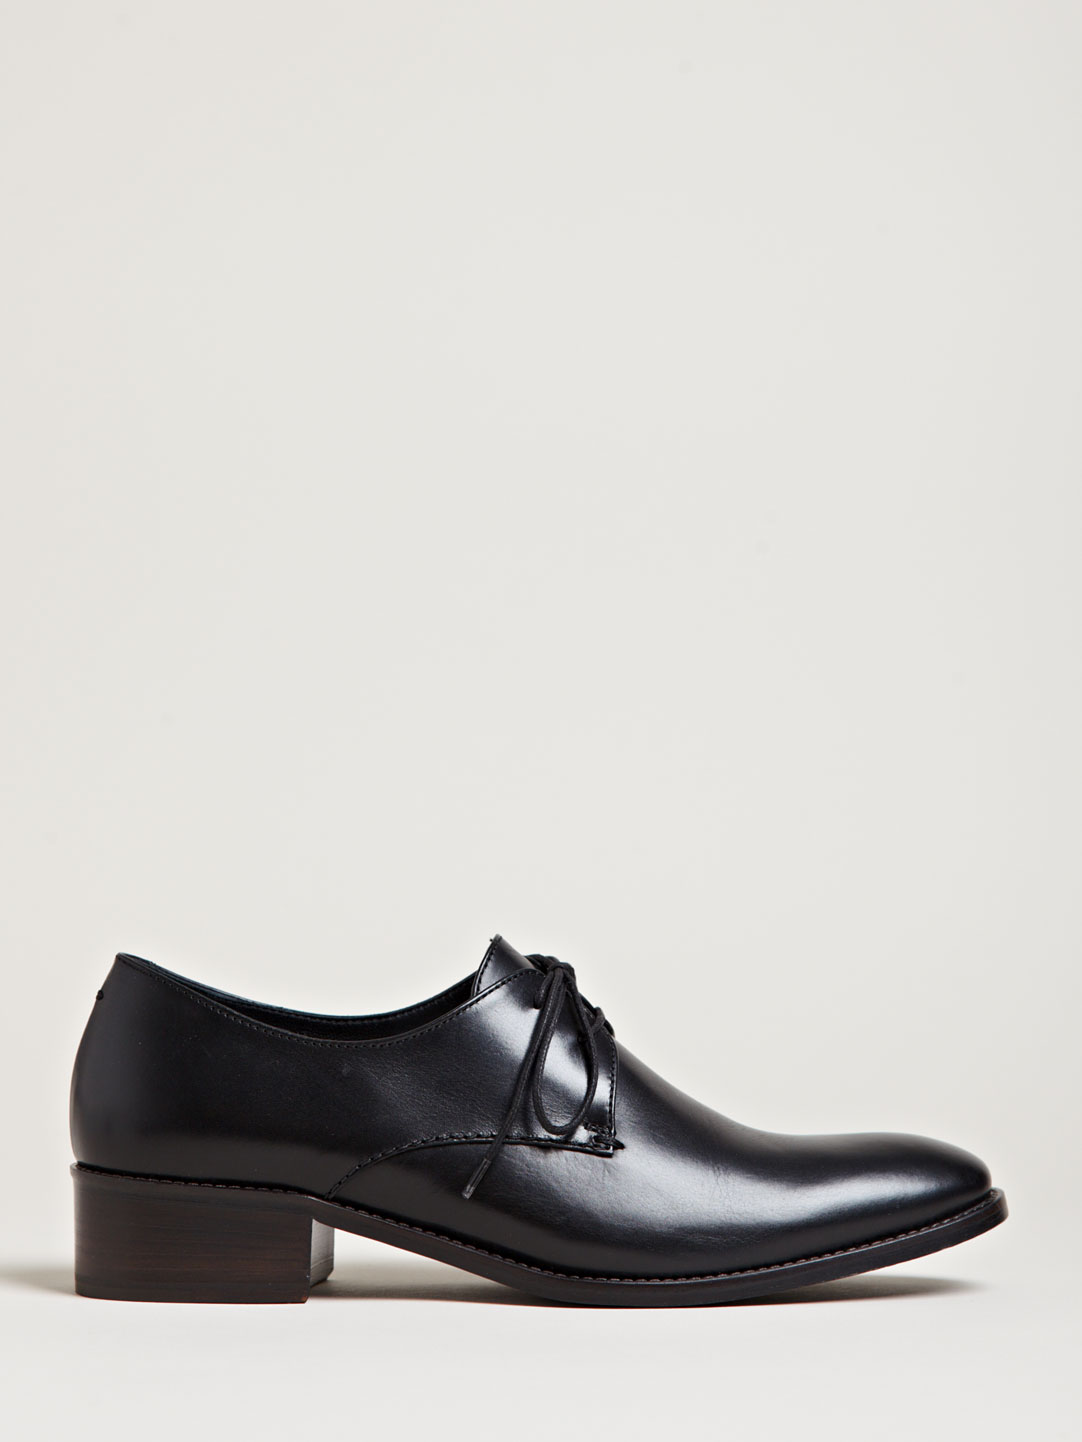 Haider Ackermann Womens Lux Leather Derby Shoes in Black | Lyst